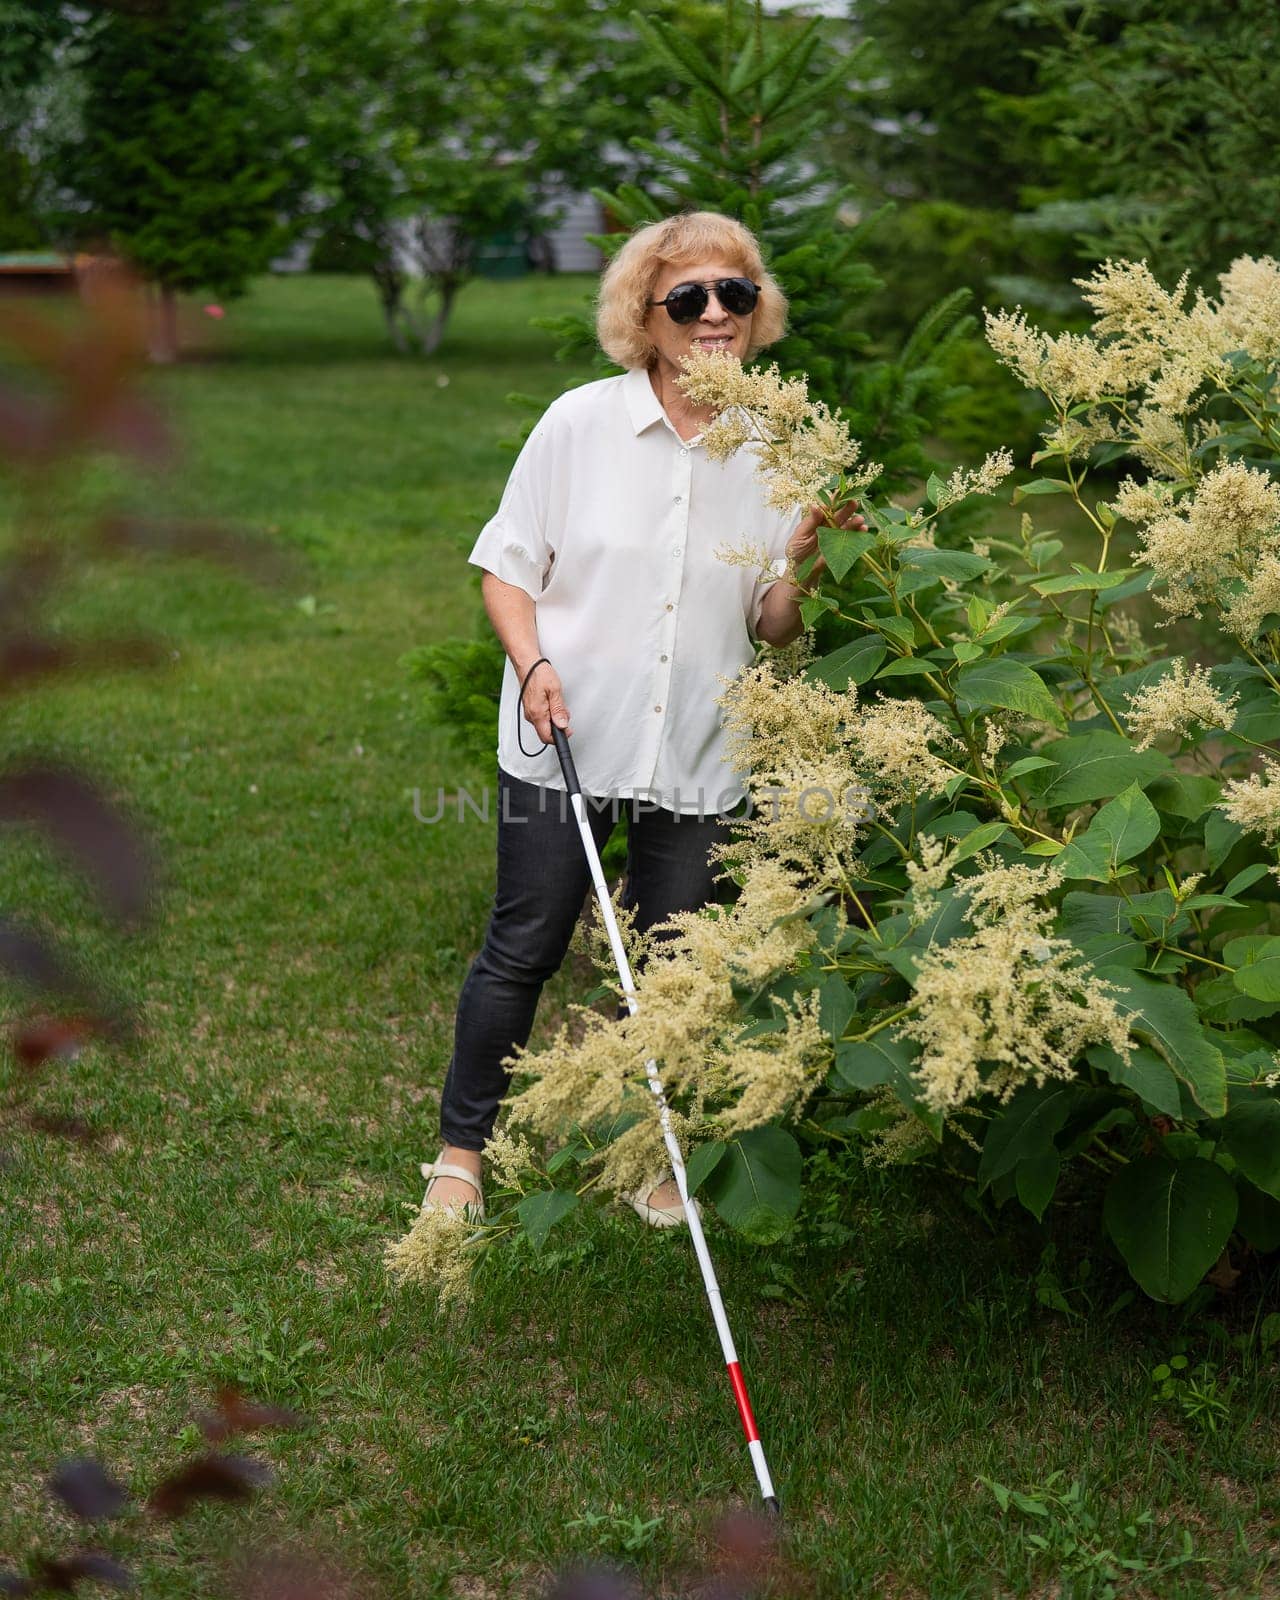 An elderly blind woman smells a flowering shrub while walking in the park. by mrwed54